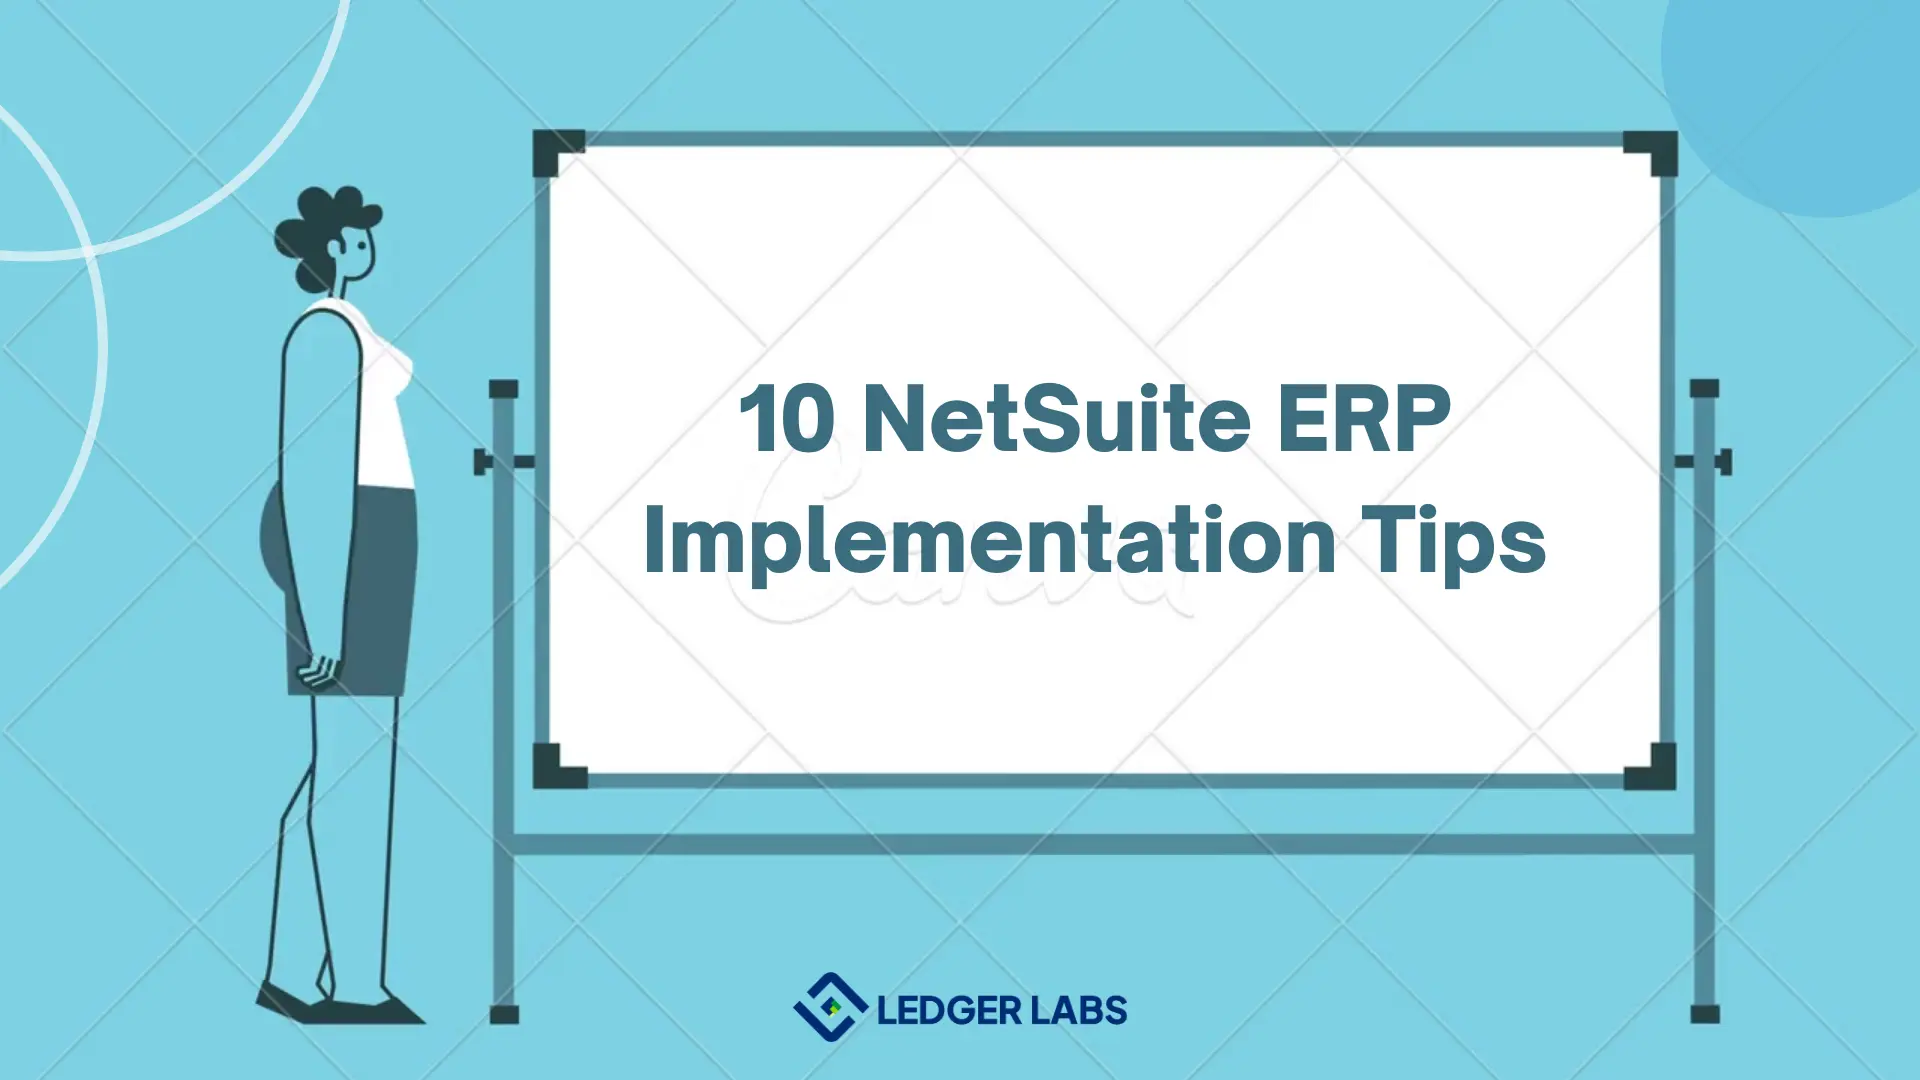 10 NetSuite ERP Implementation Tips